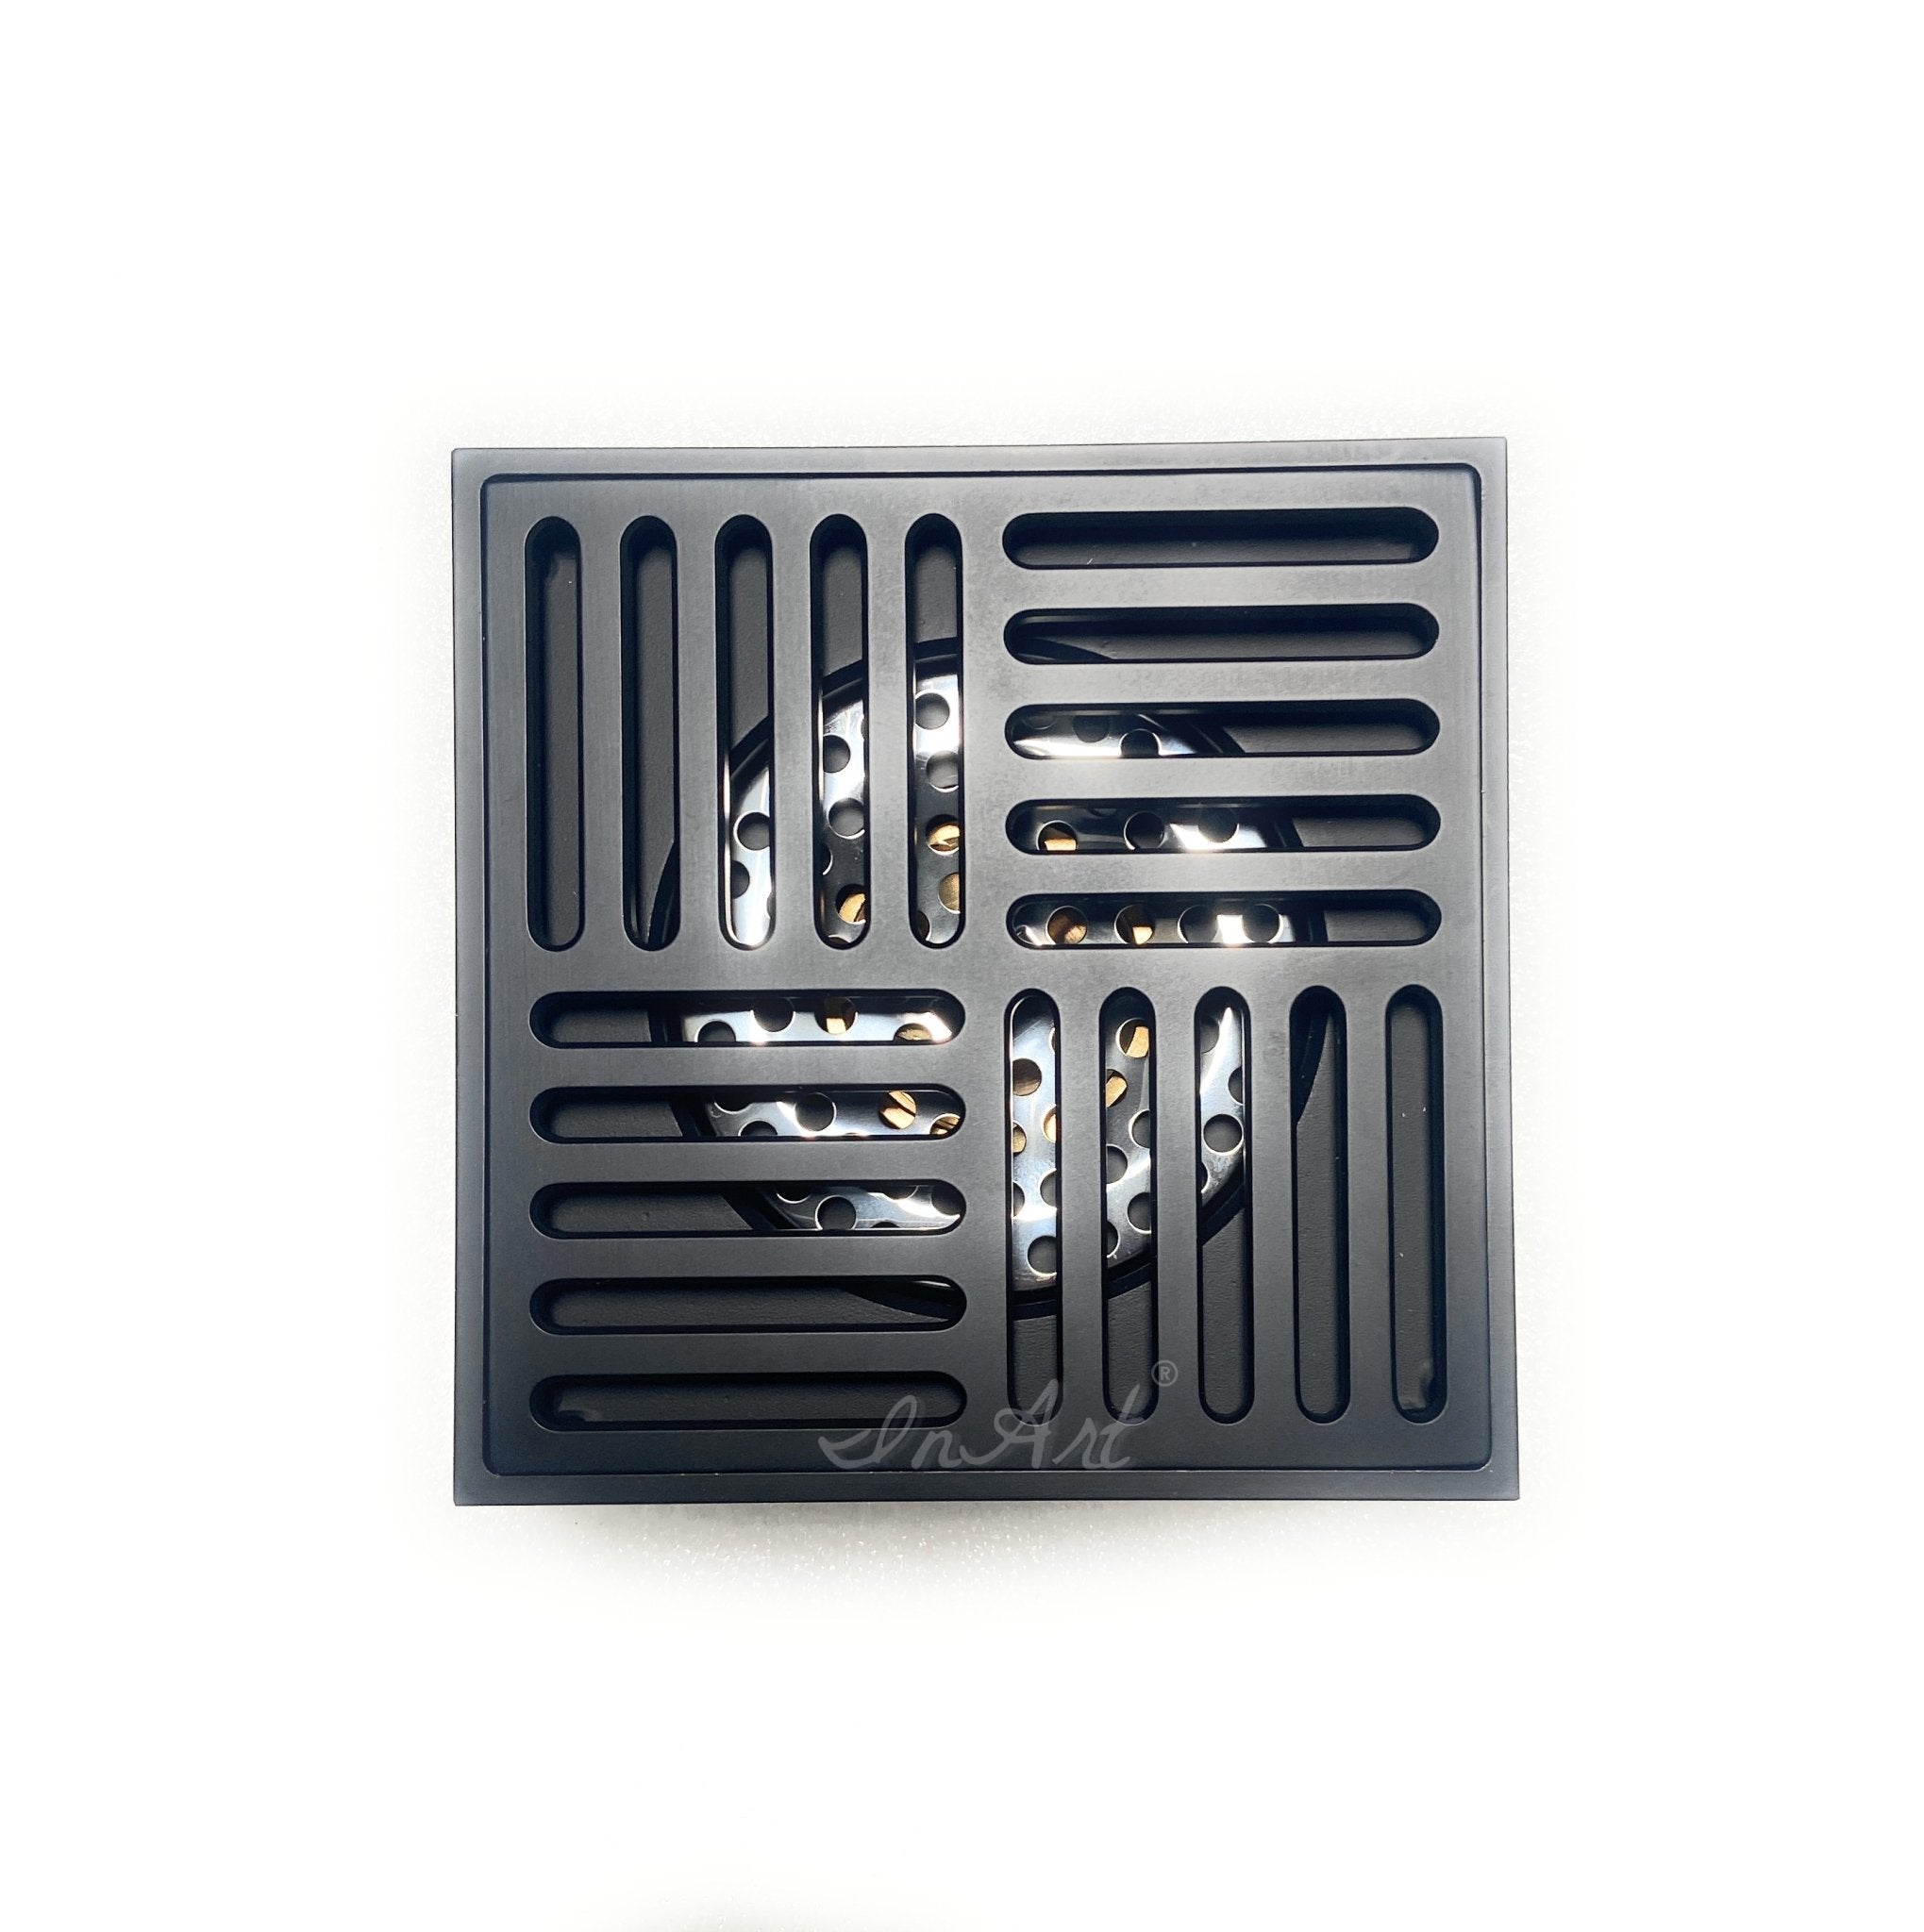 https://inart-in.com/cdn/shop/products/inart-brass-square-shower-floor-drain-with-removable-cover-grid-grate-5-inch-long-black-matt-color-stripes-pattern-inart-studio-usa-192124_2048x2048.jpg?v=1663697016